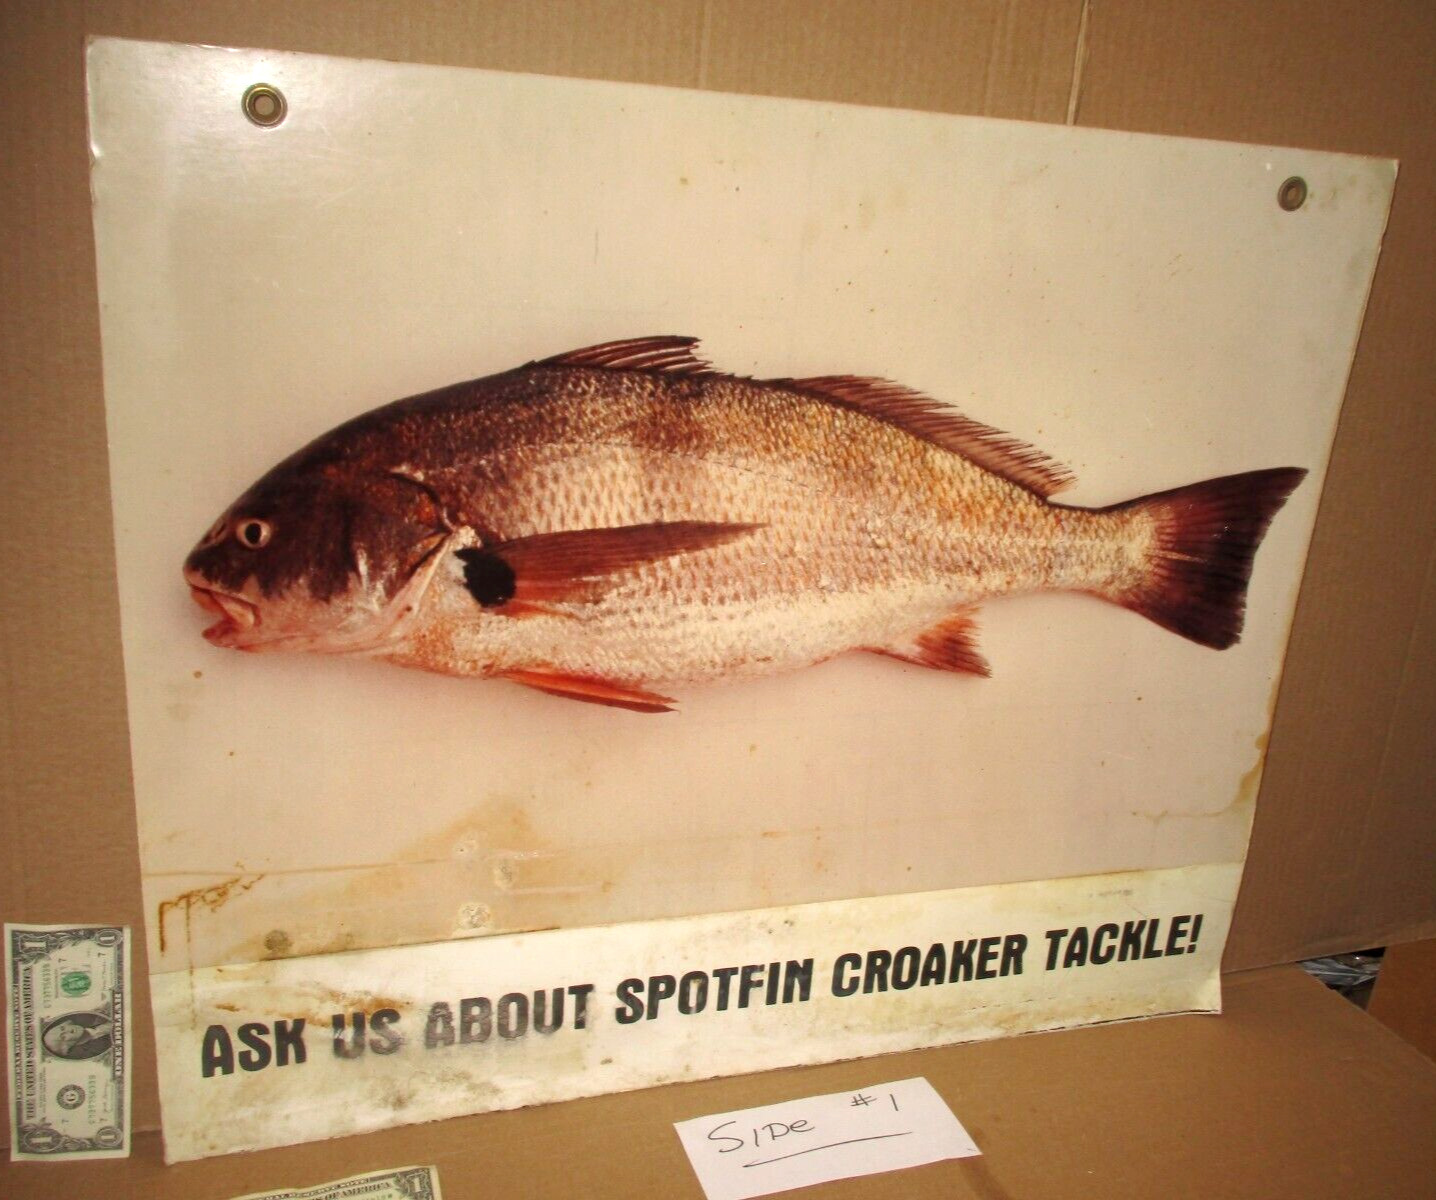 BAIT SHOP -Ask Us About Croaker Tackle -TWO SIDED- VINTAGE -GIANT SIZE Fish Sign